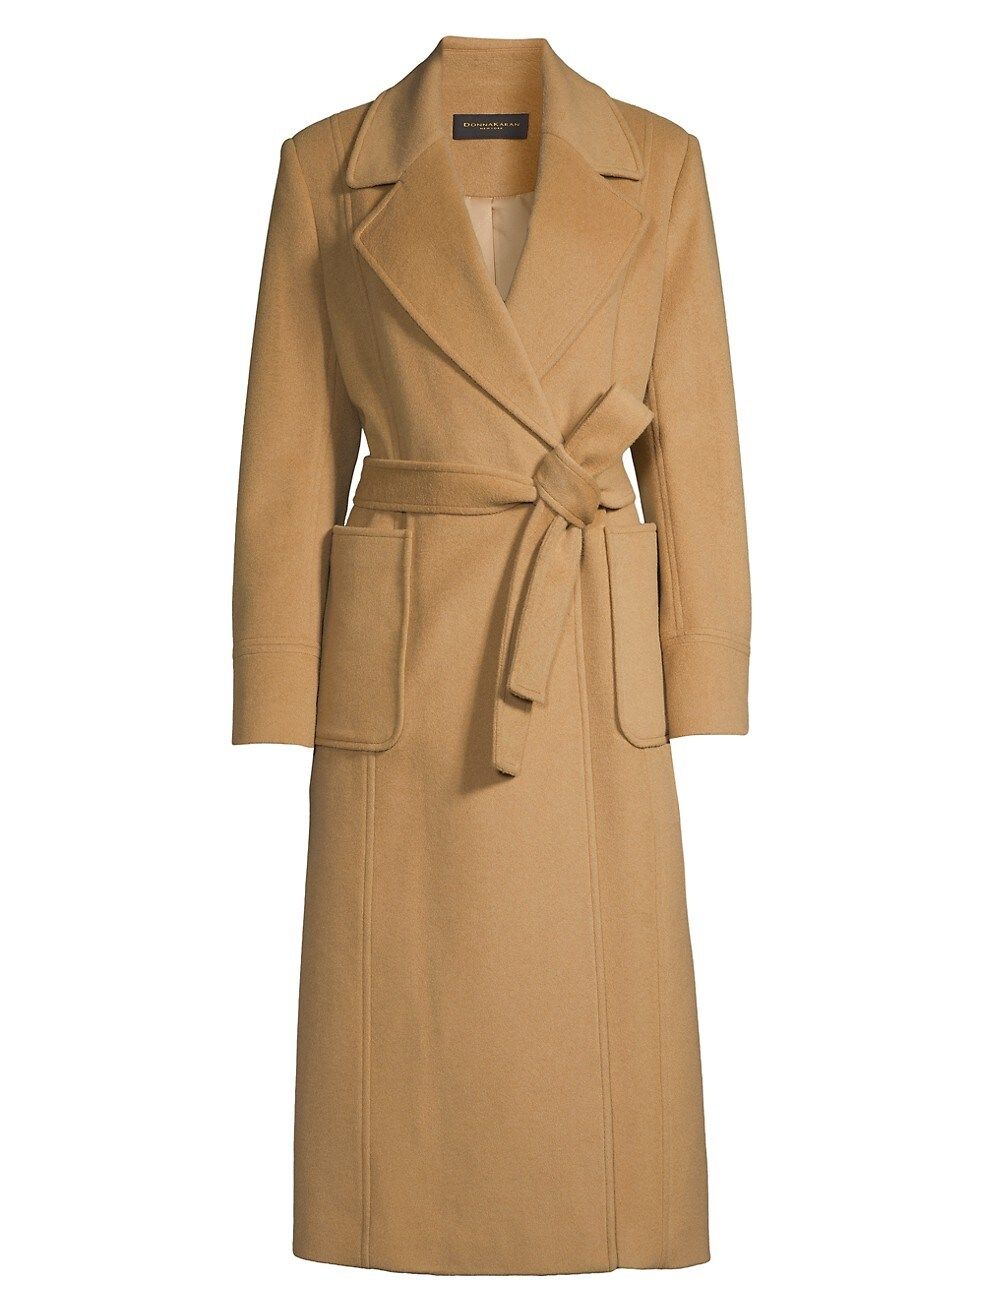 Donna Karan New York Double-Breasted Wool Blend Wrap Coat | Saks Fifth Avenue